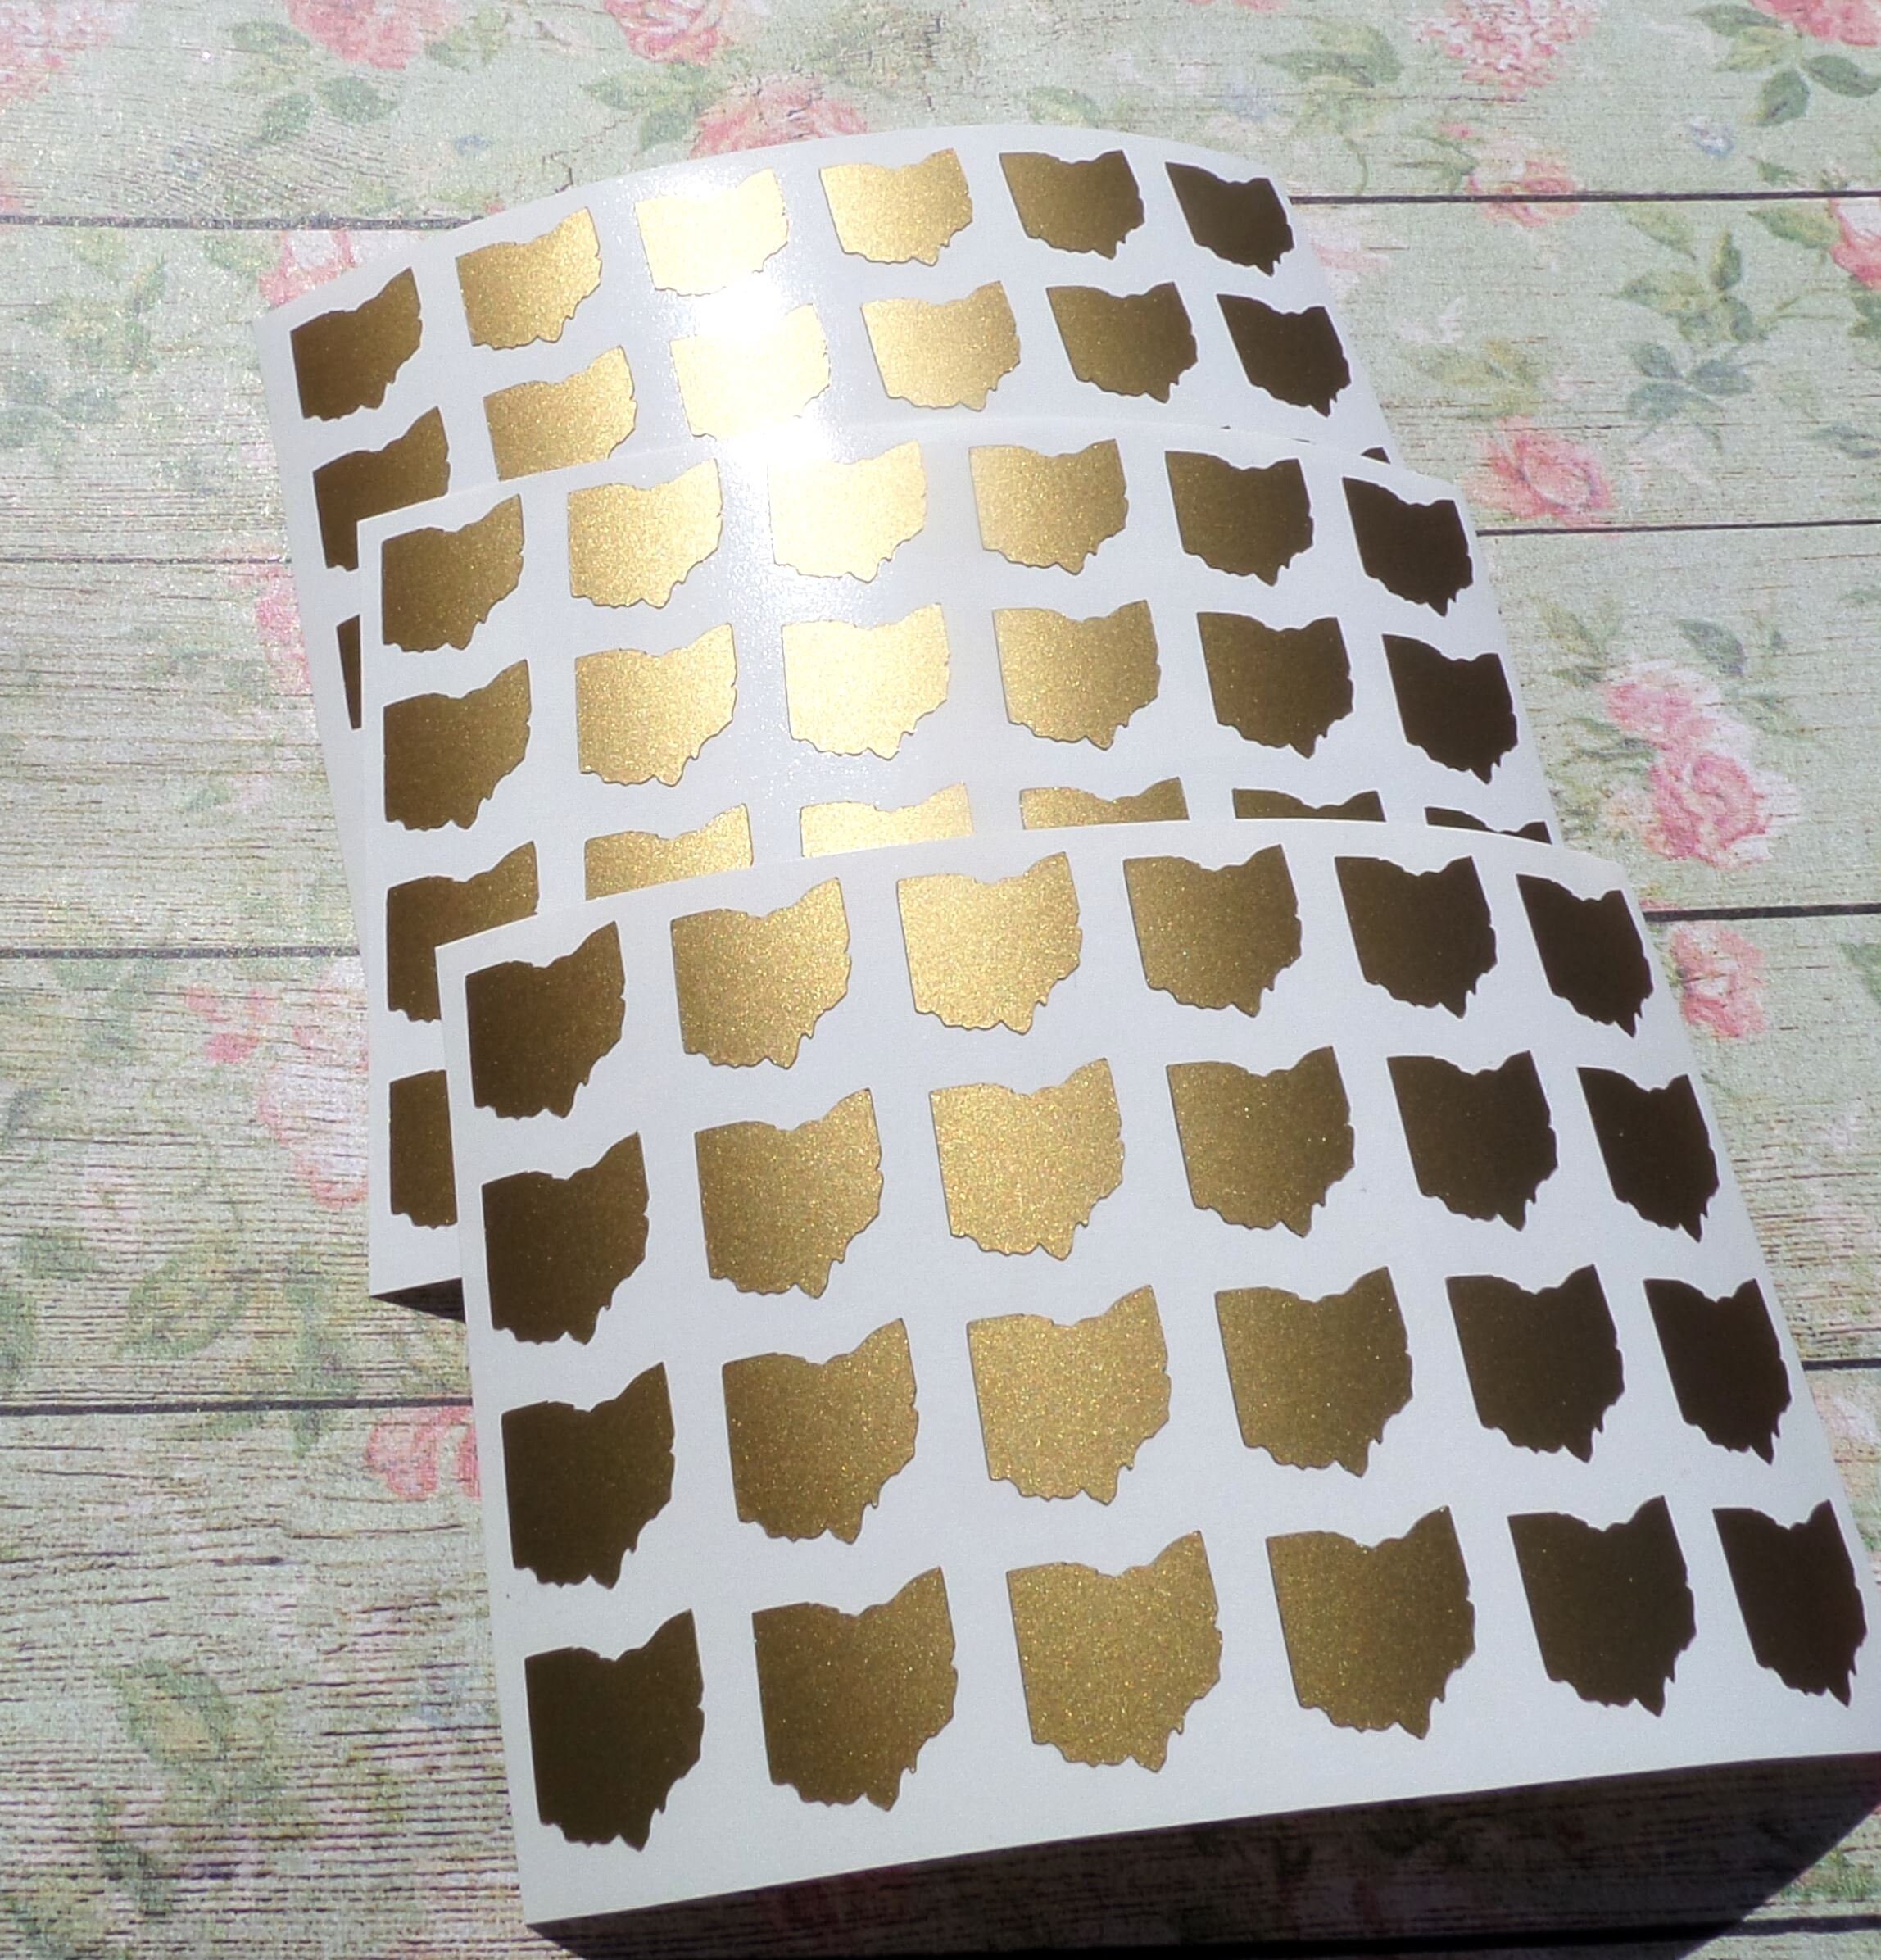 20 Gold Heart Stickers, Wedding Envelope Seal, 0.5-2in 1.2-5cm, Vinyl Decal,  Engagement Invitation Decor, Craft Supply 